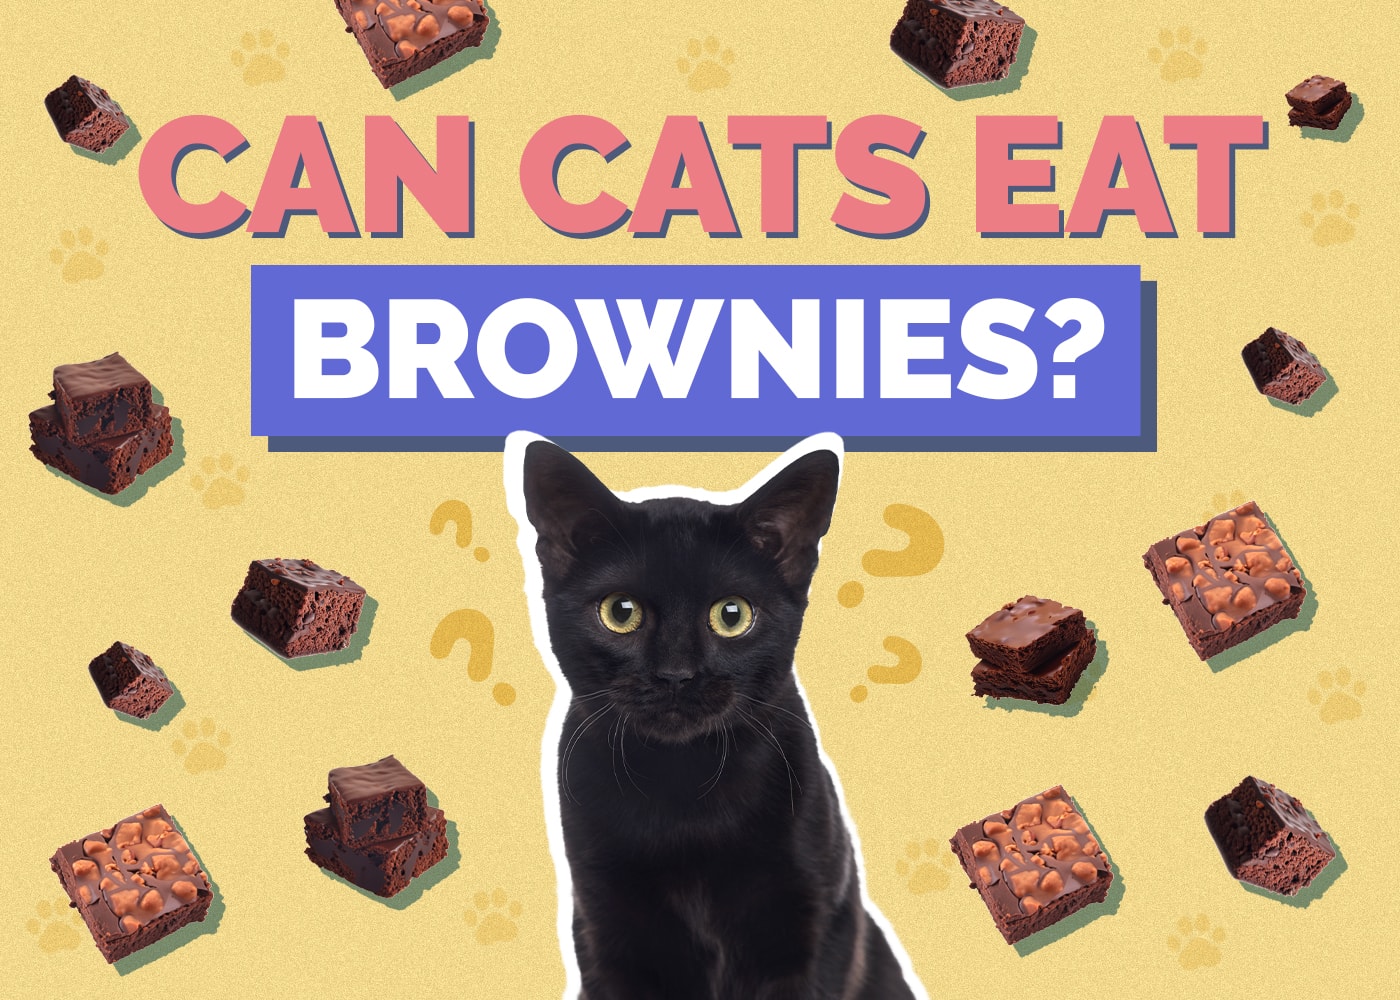 Can Cats Eat brownies